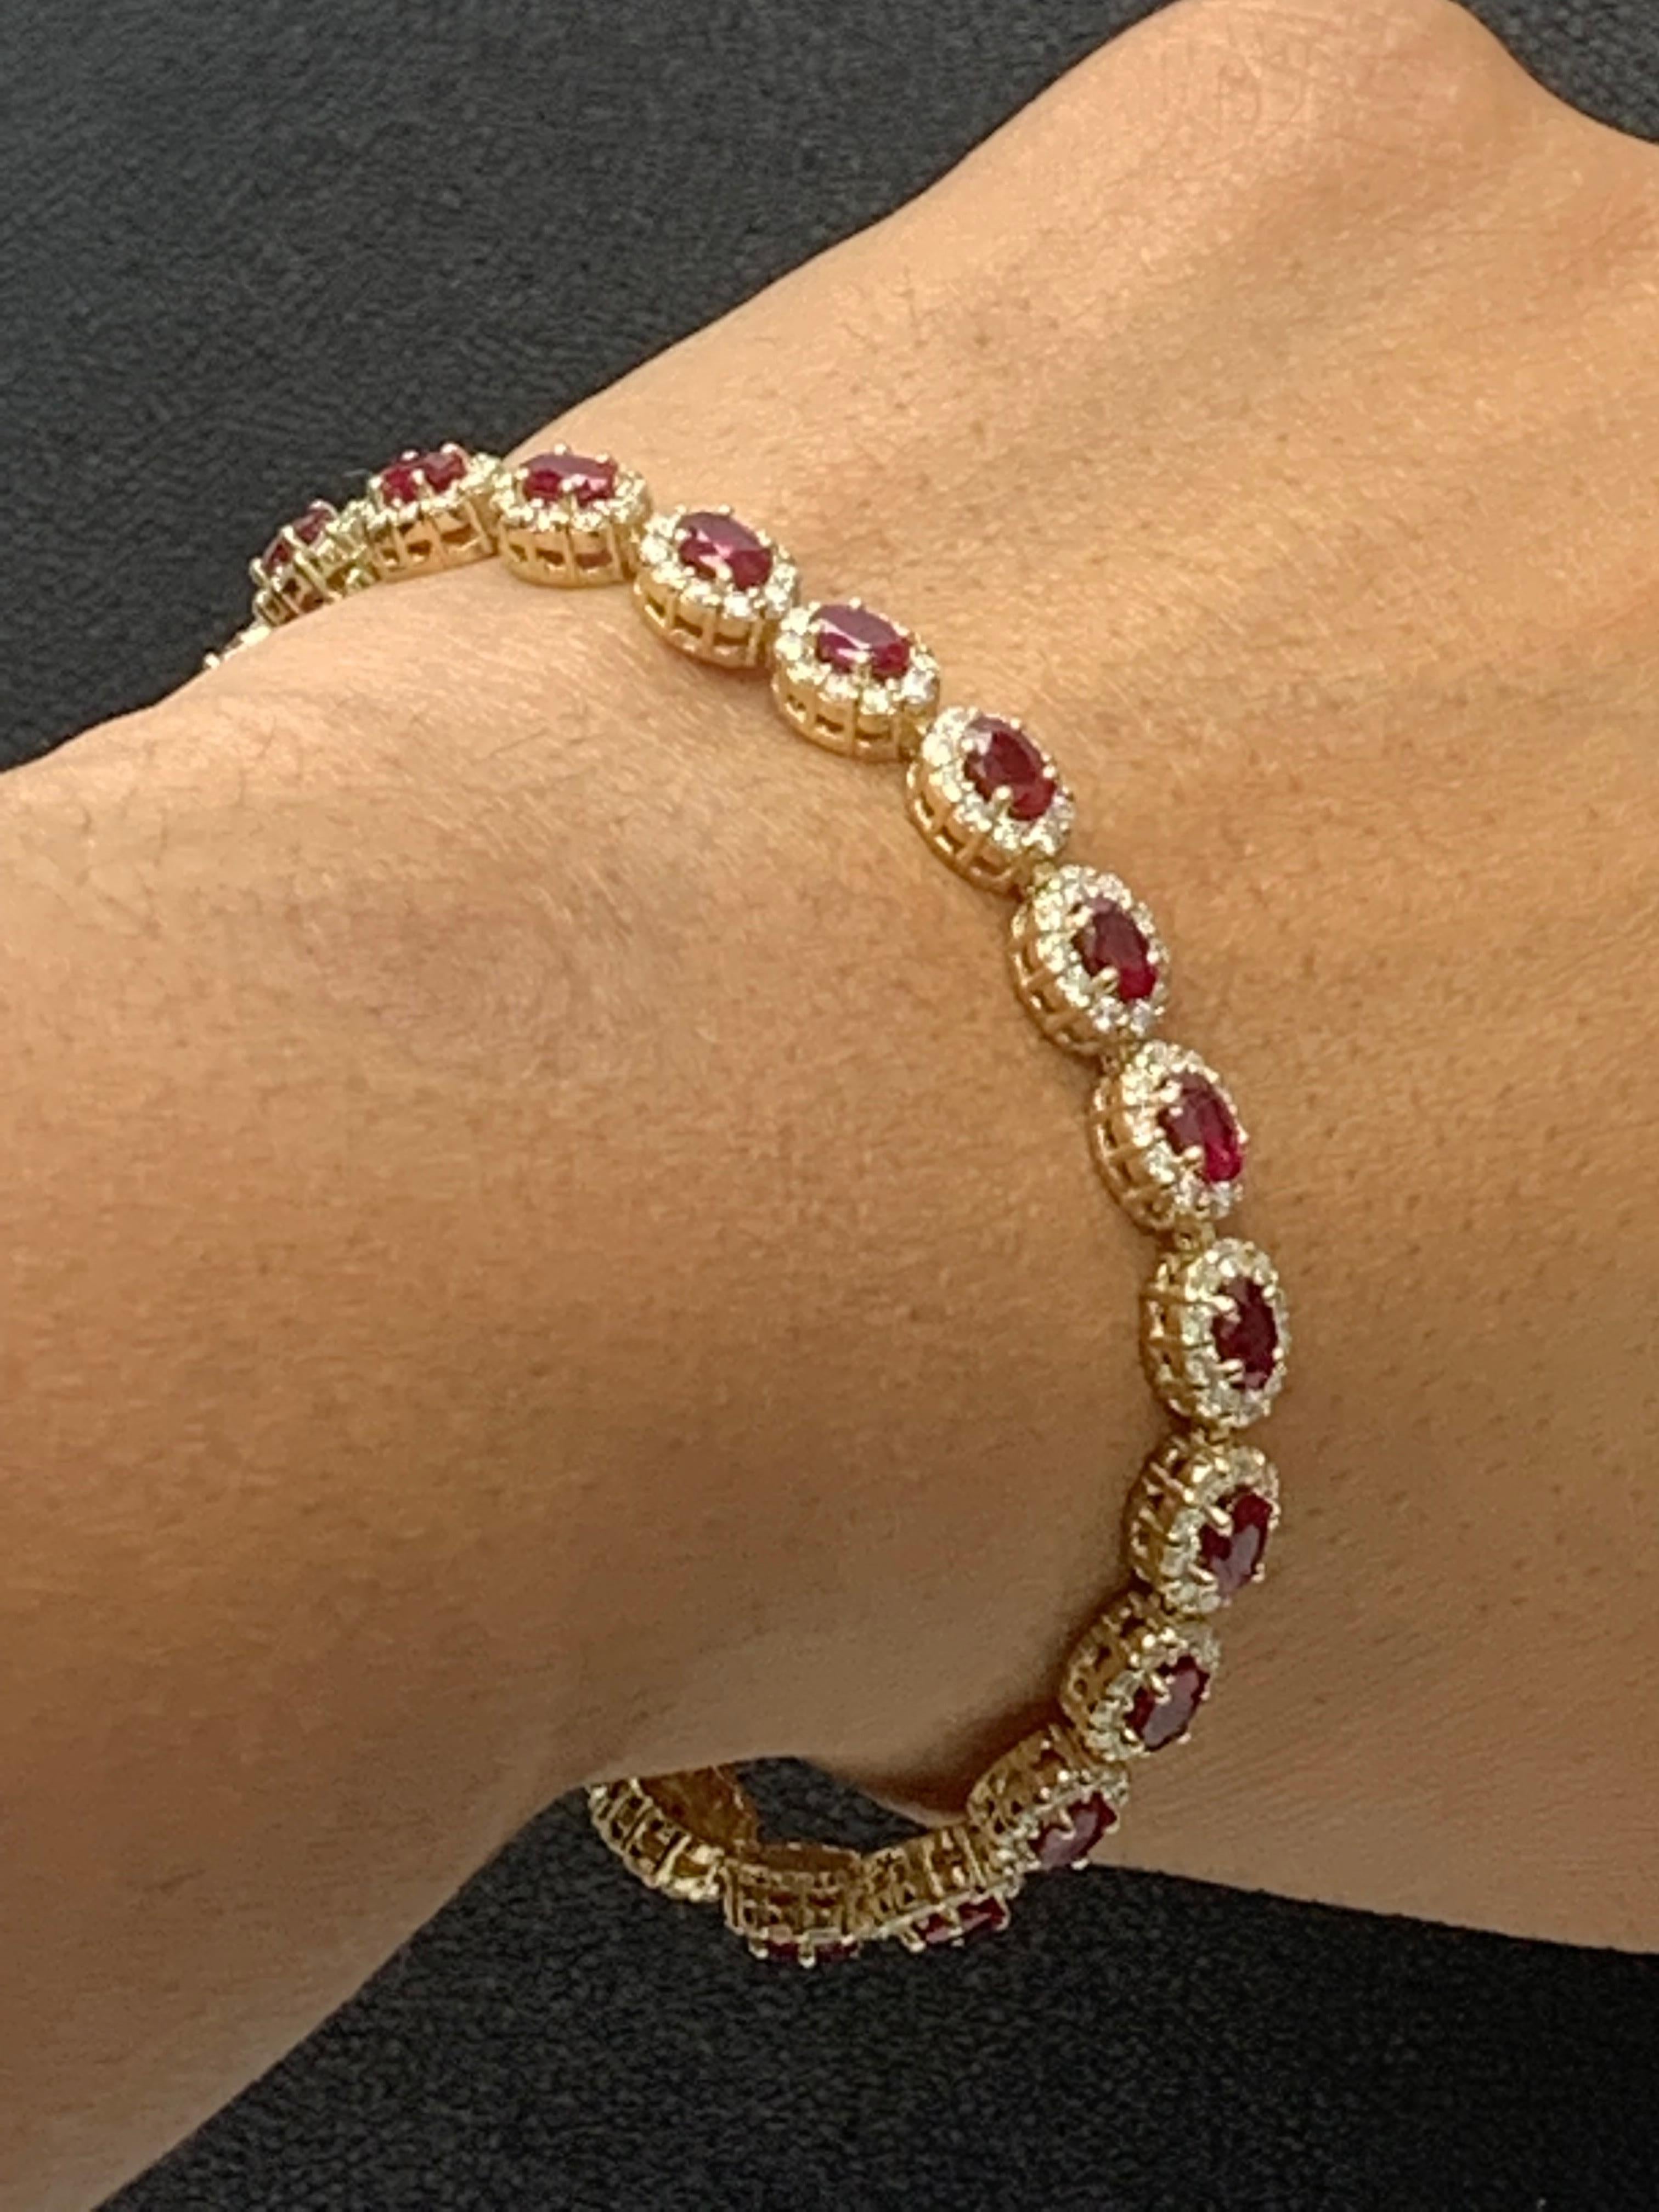 6.43 Carat Oval Cut Ruby and Diamond Halo Bracelet in 14K Yellow Gold For Sale 5